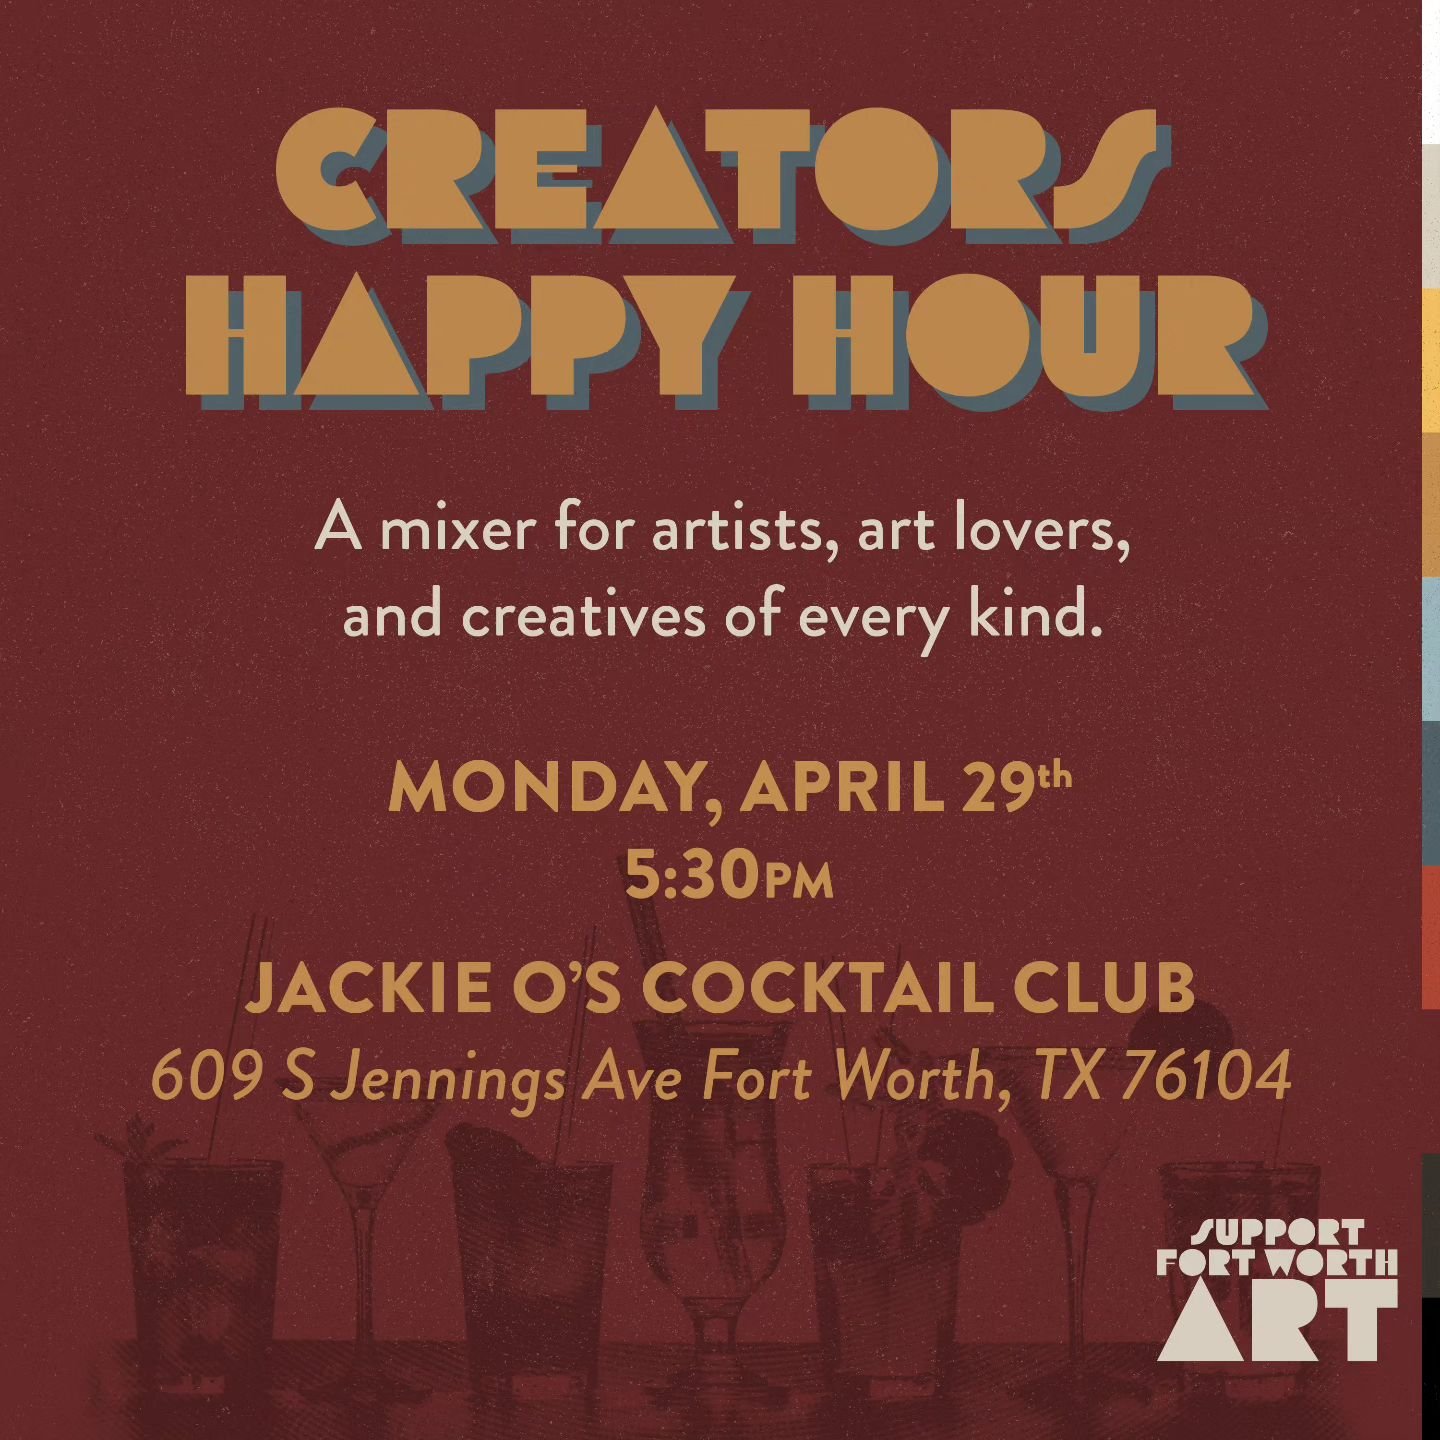 Want to meet local artists, art lovers, and creatives of all kinds? Join us this coming Monday at 5:30pm for another Creators Happy Hour at Jackie O's Cocktail Club.

Looking forward to seeing y'all there!